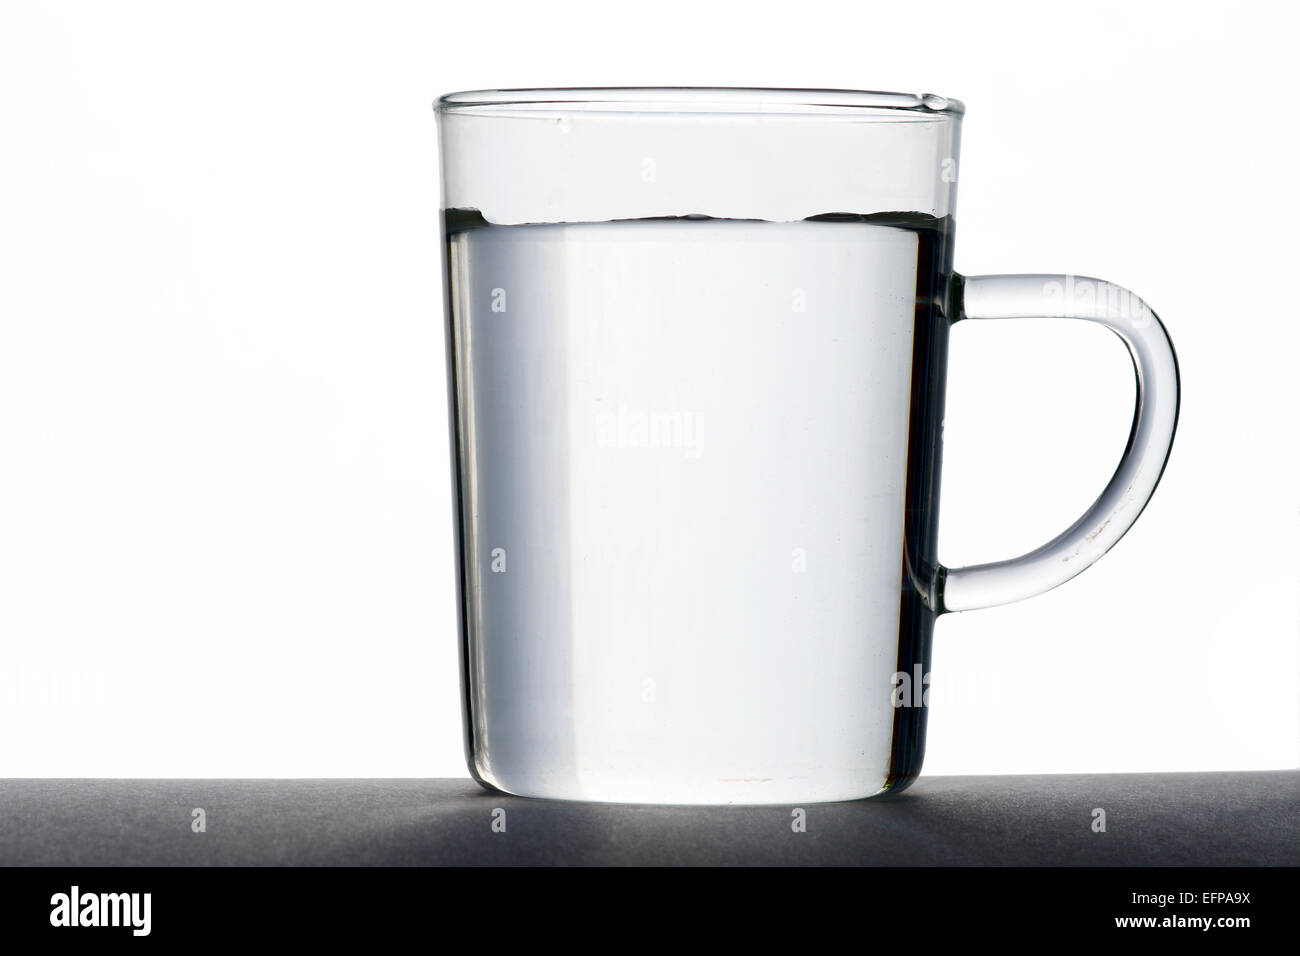 https://c8.alamy.com/comp/EFPA9X/glass-cup-with-water-EFPA9X.jpg